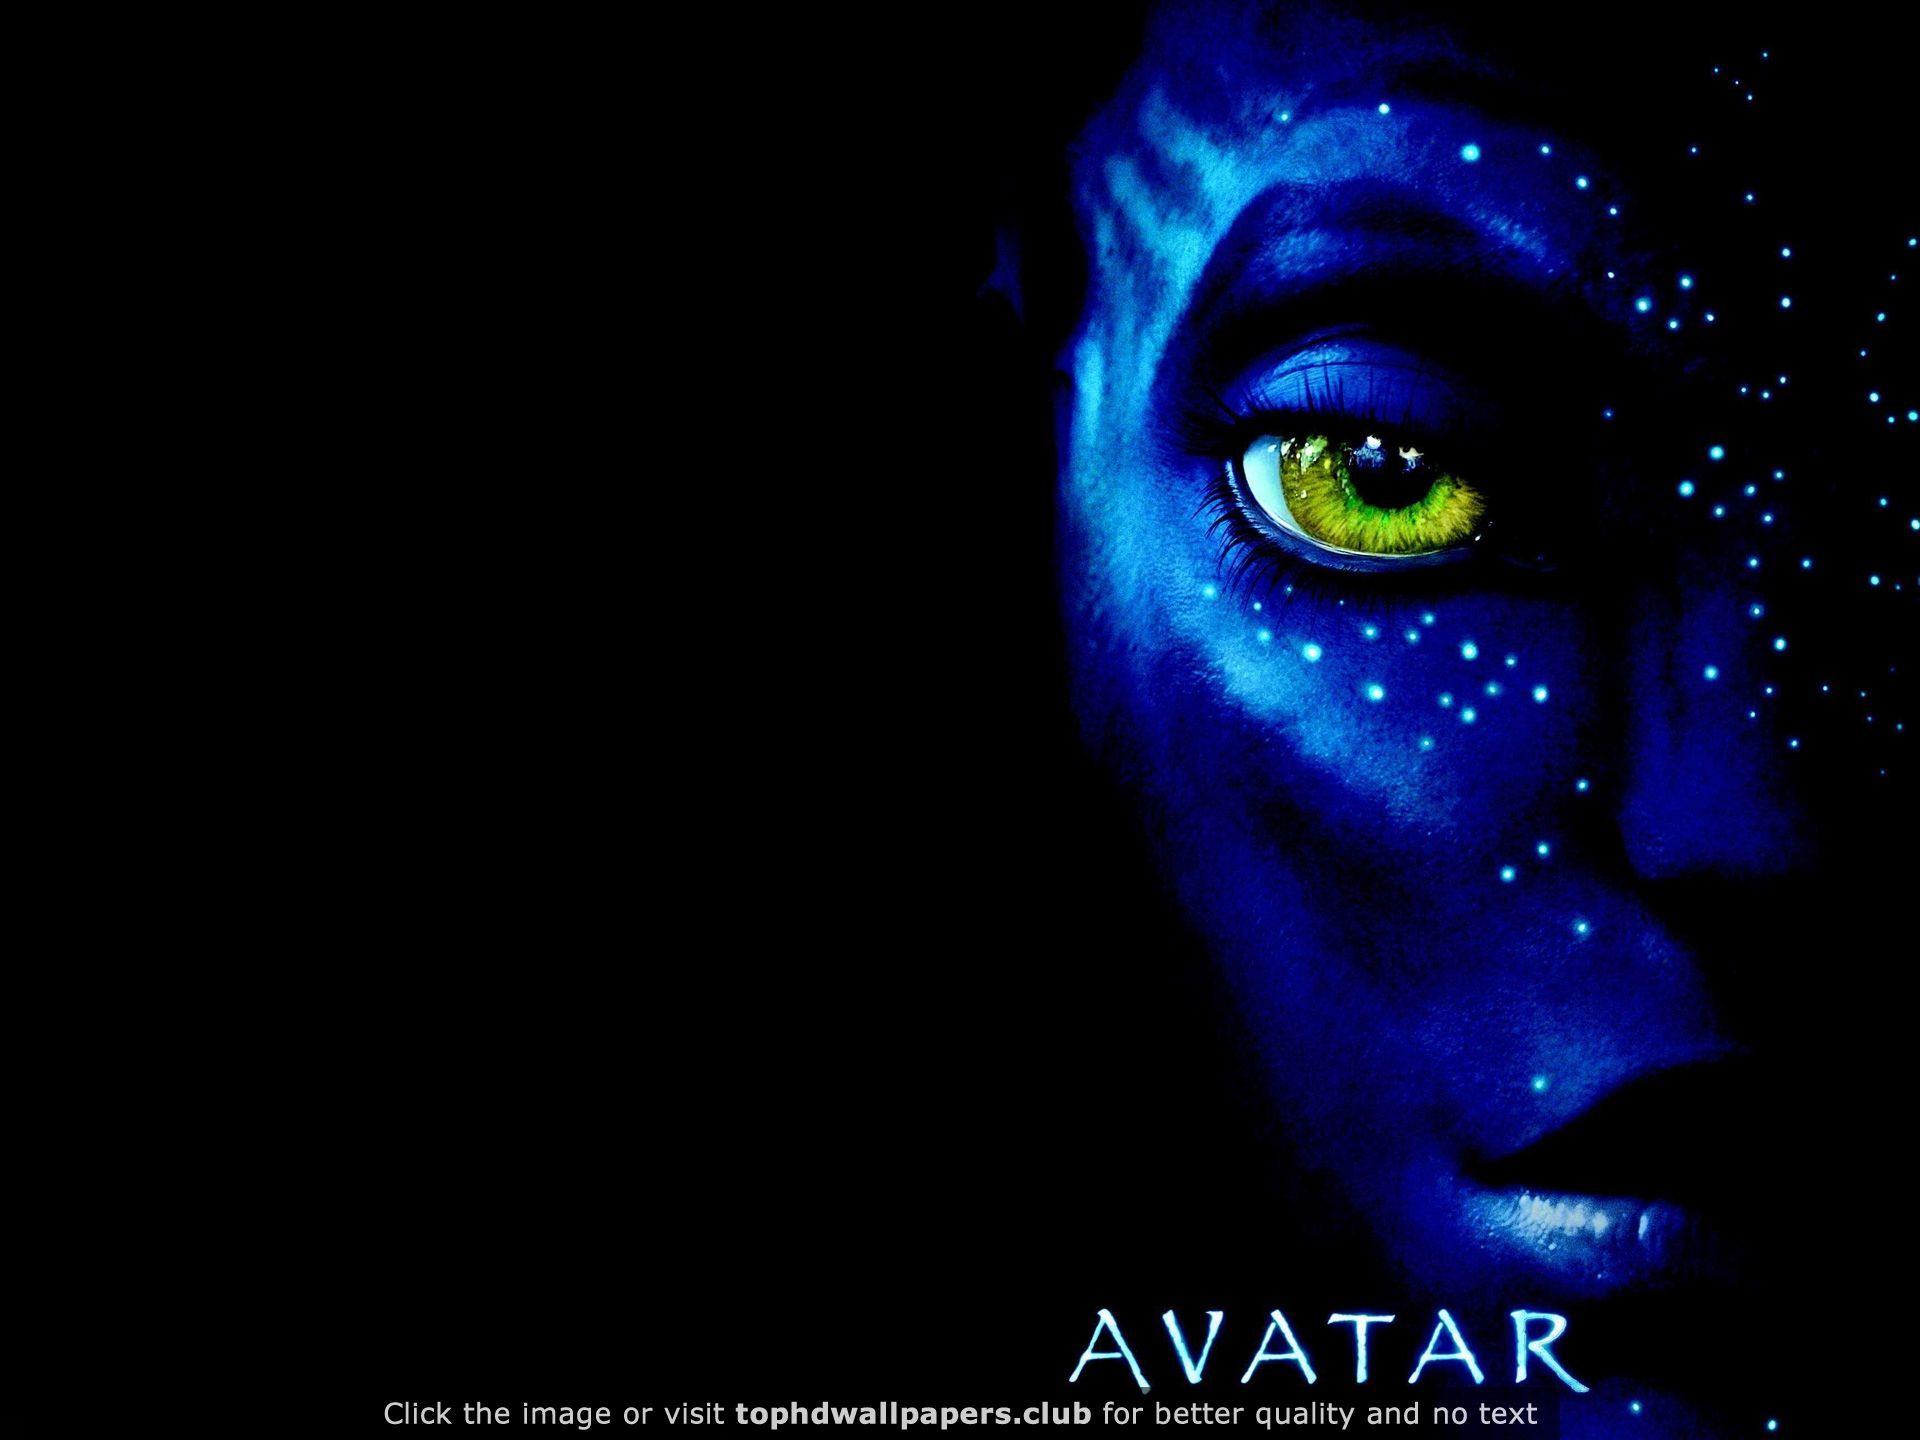 Official Avatar Movie Poster HD wallpaper for your PC, Mac or Mobile device. Avatar movie, Avatar movie poster, Movie wallpaper